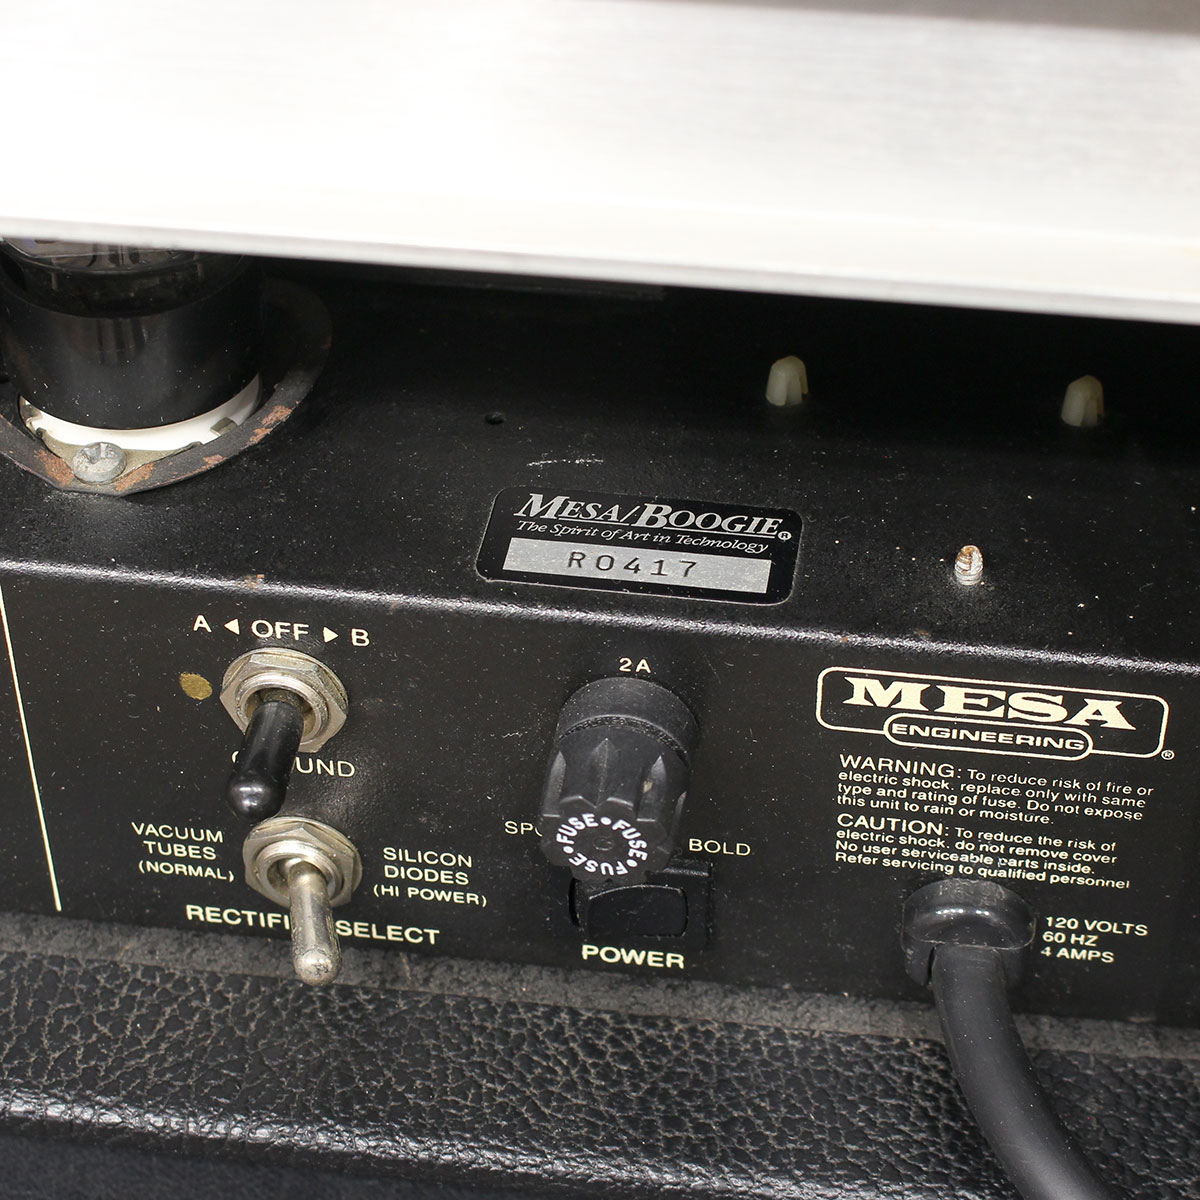 1992 Mesa Boogie Dual Rectifier Solo Head Black Chassis ”Revision D” ＆ 4FB Armor Cabinet - 7.jpg